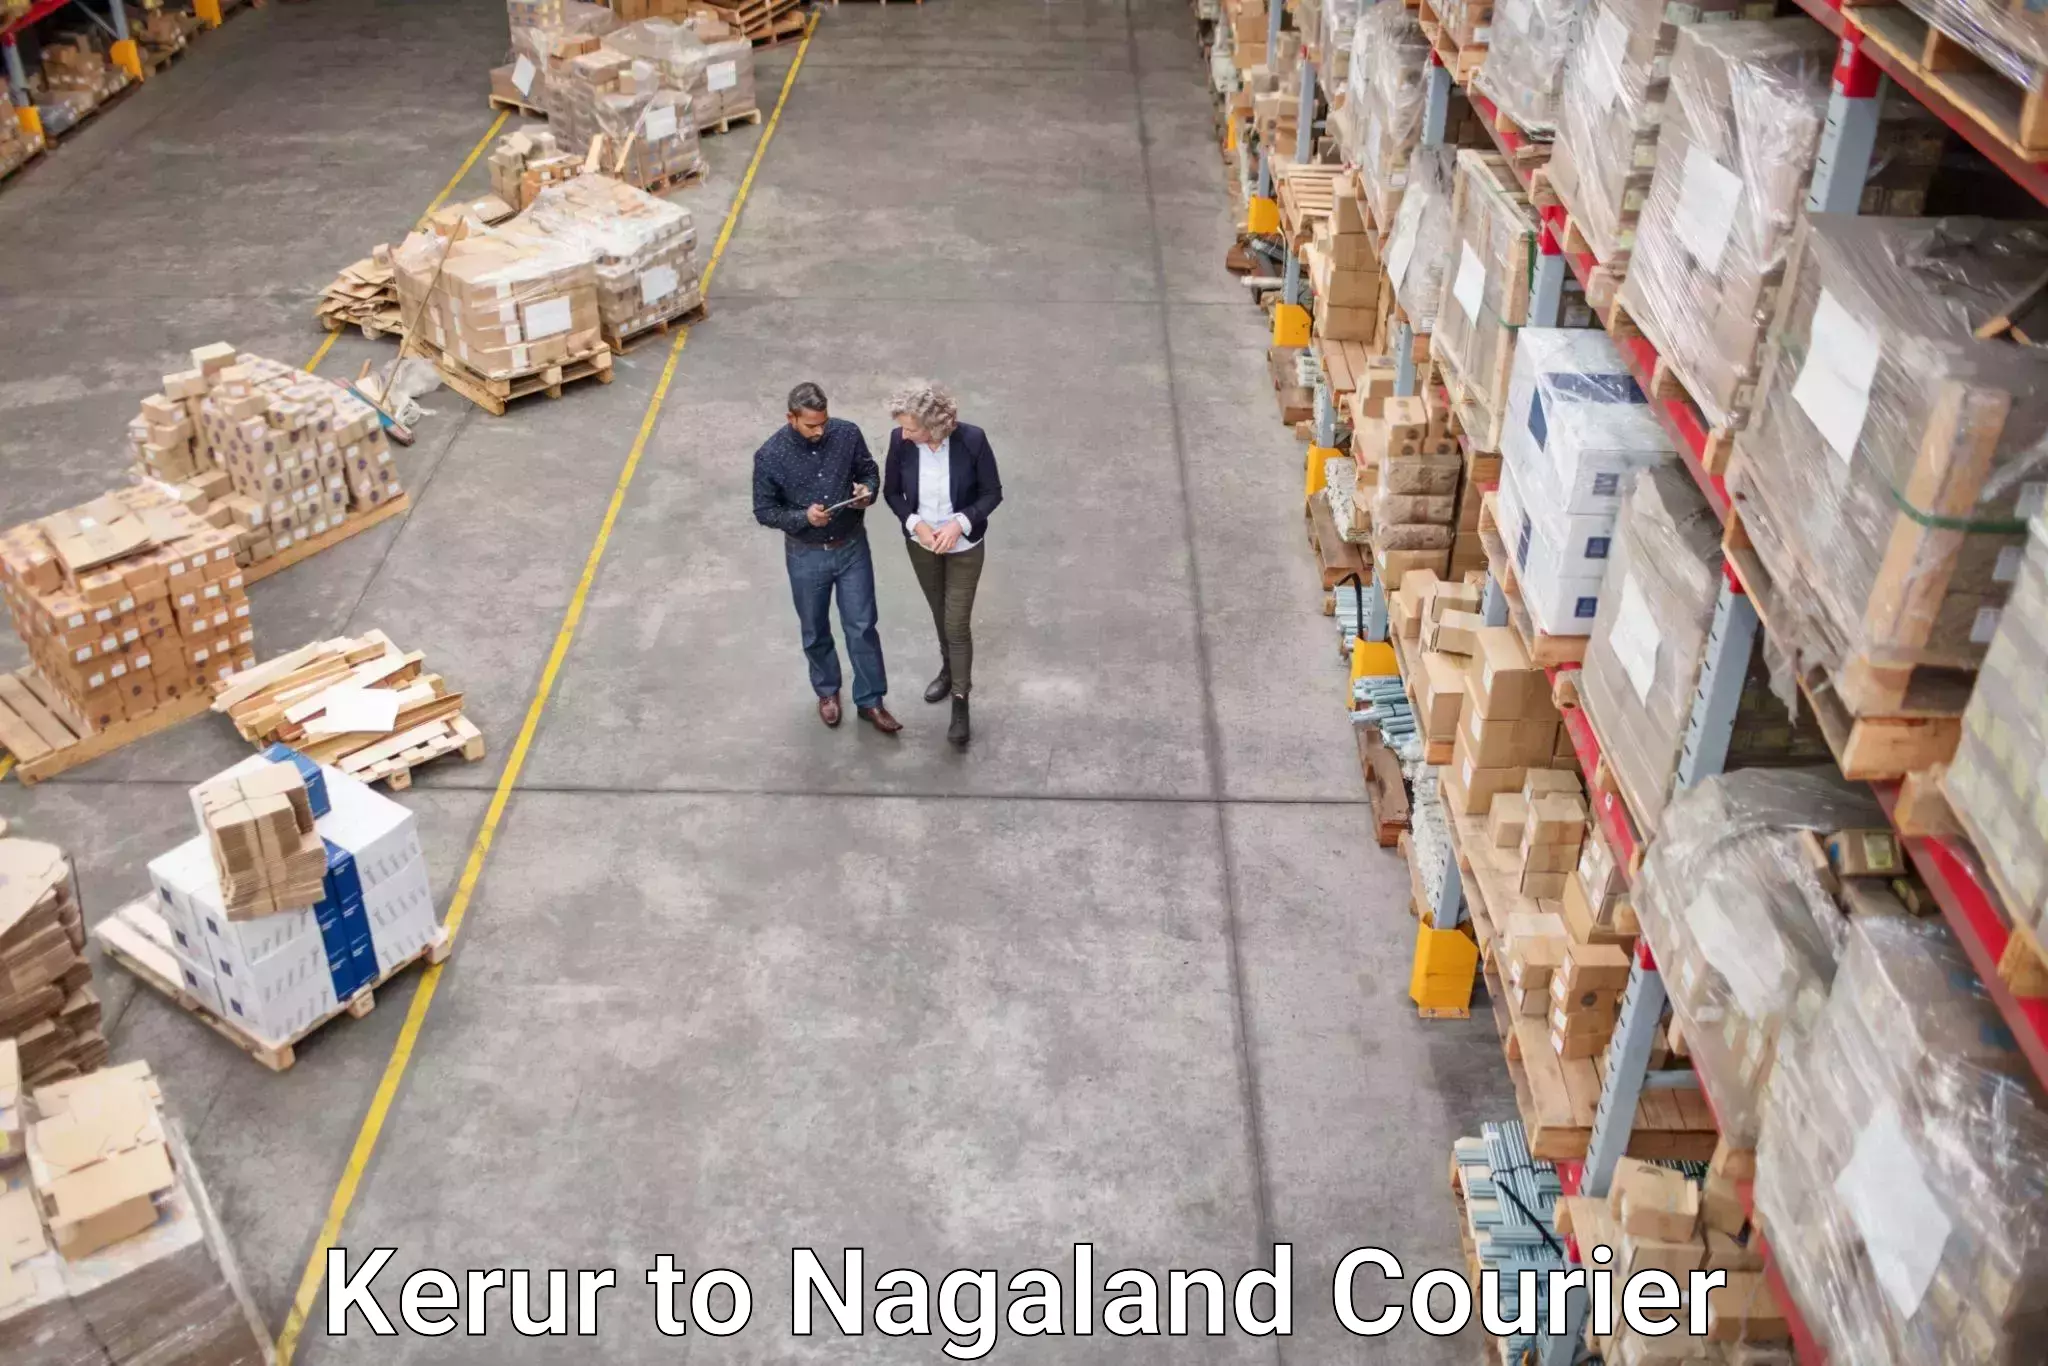 User-friendly delivery service Kerur to Nagaland